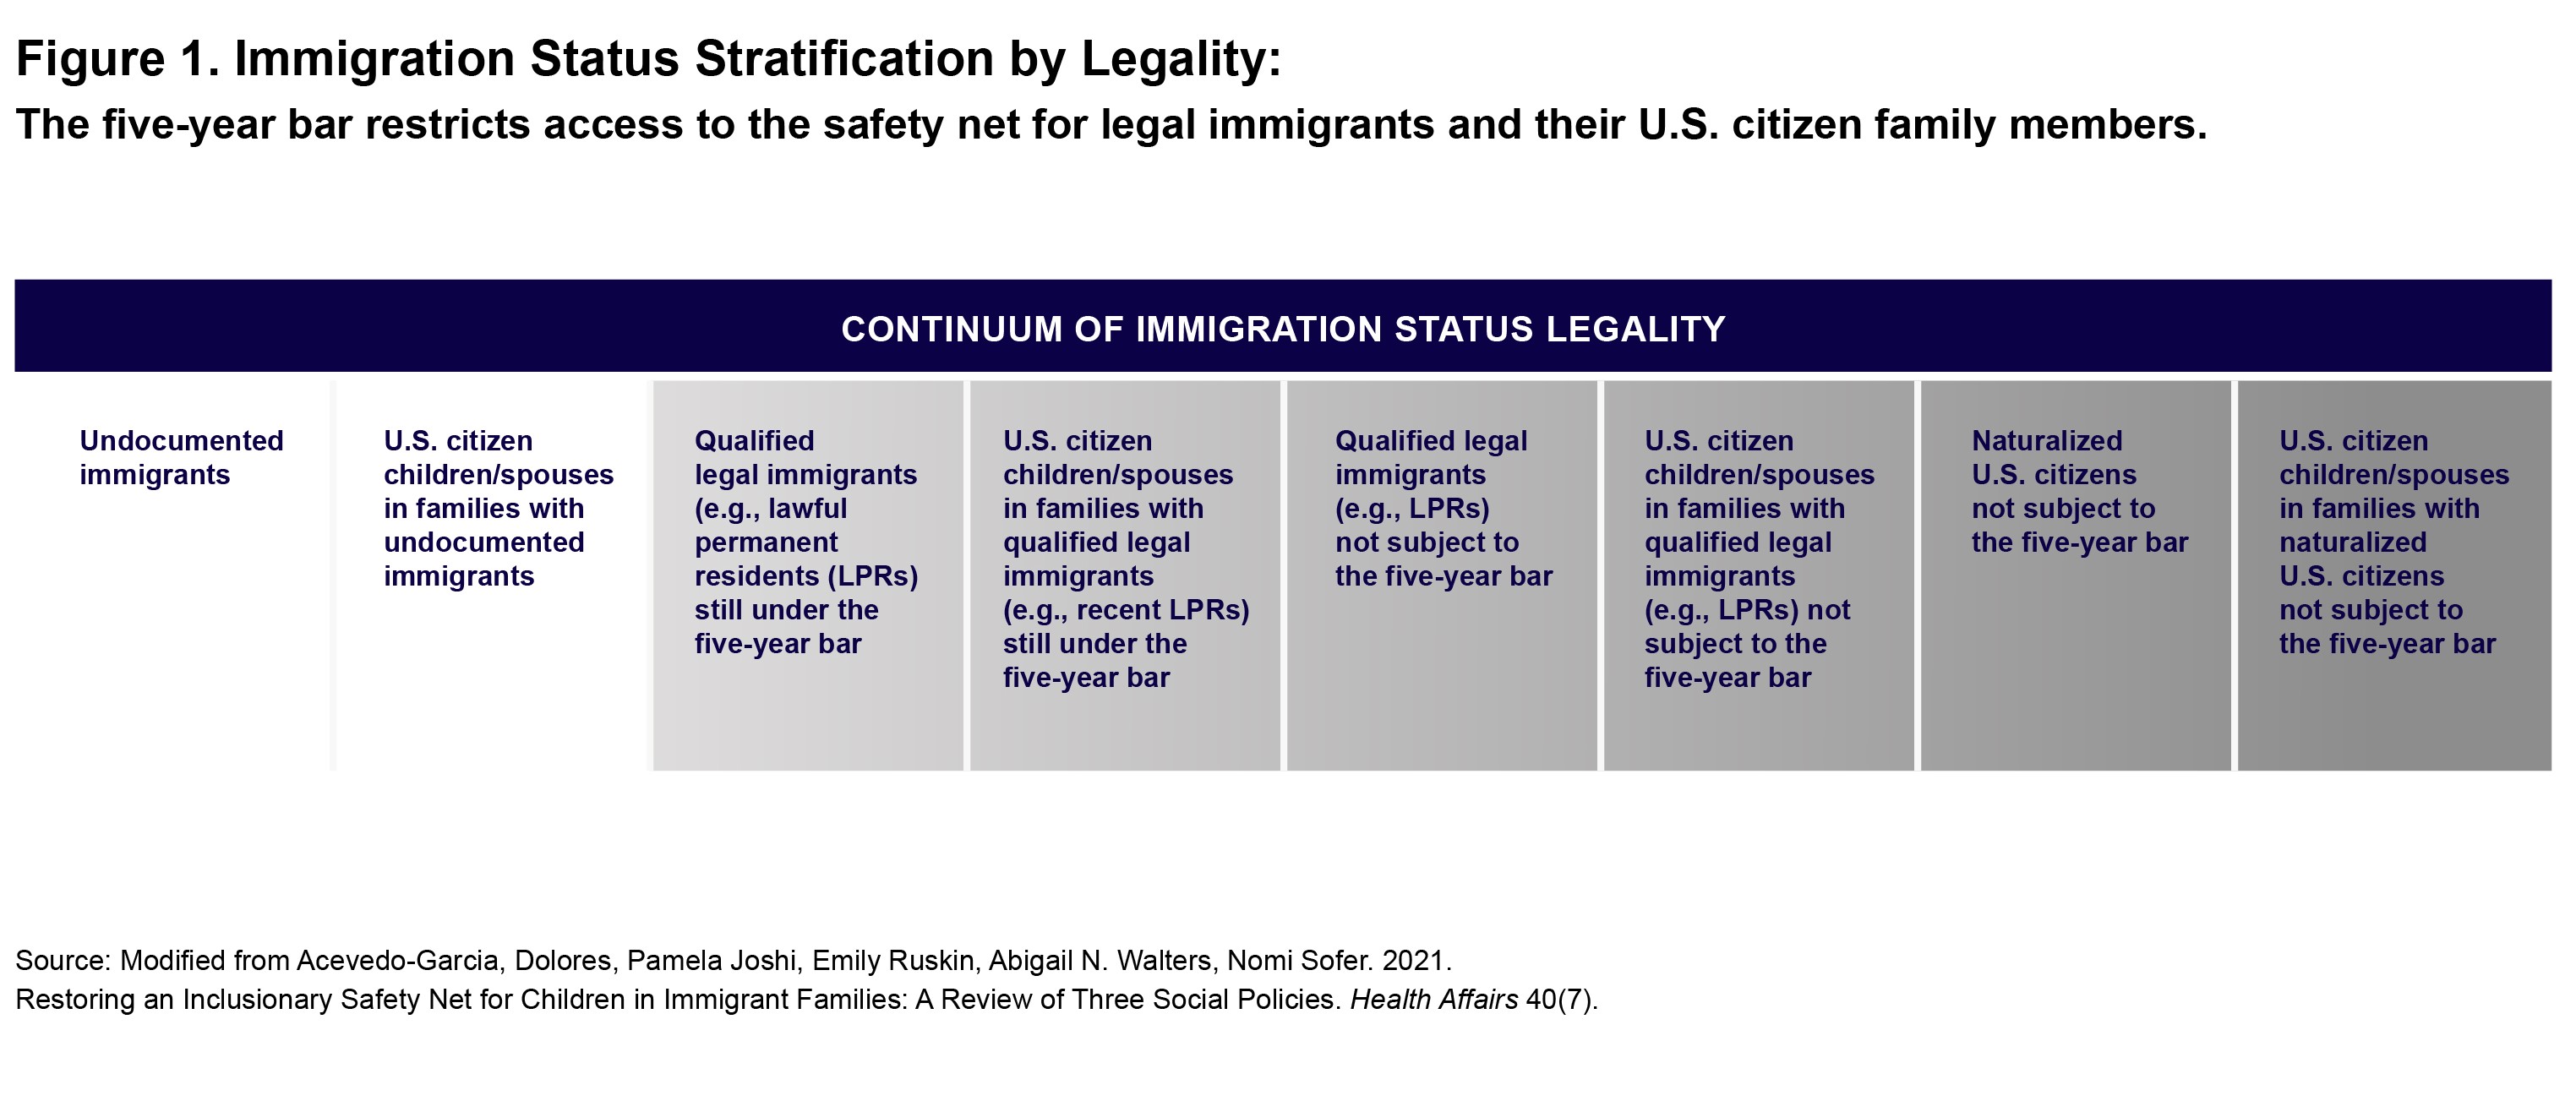 Table showing immigration status stratification by legality